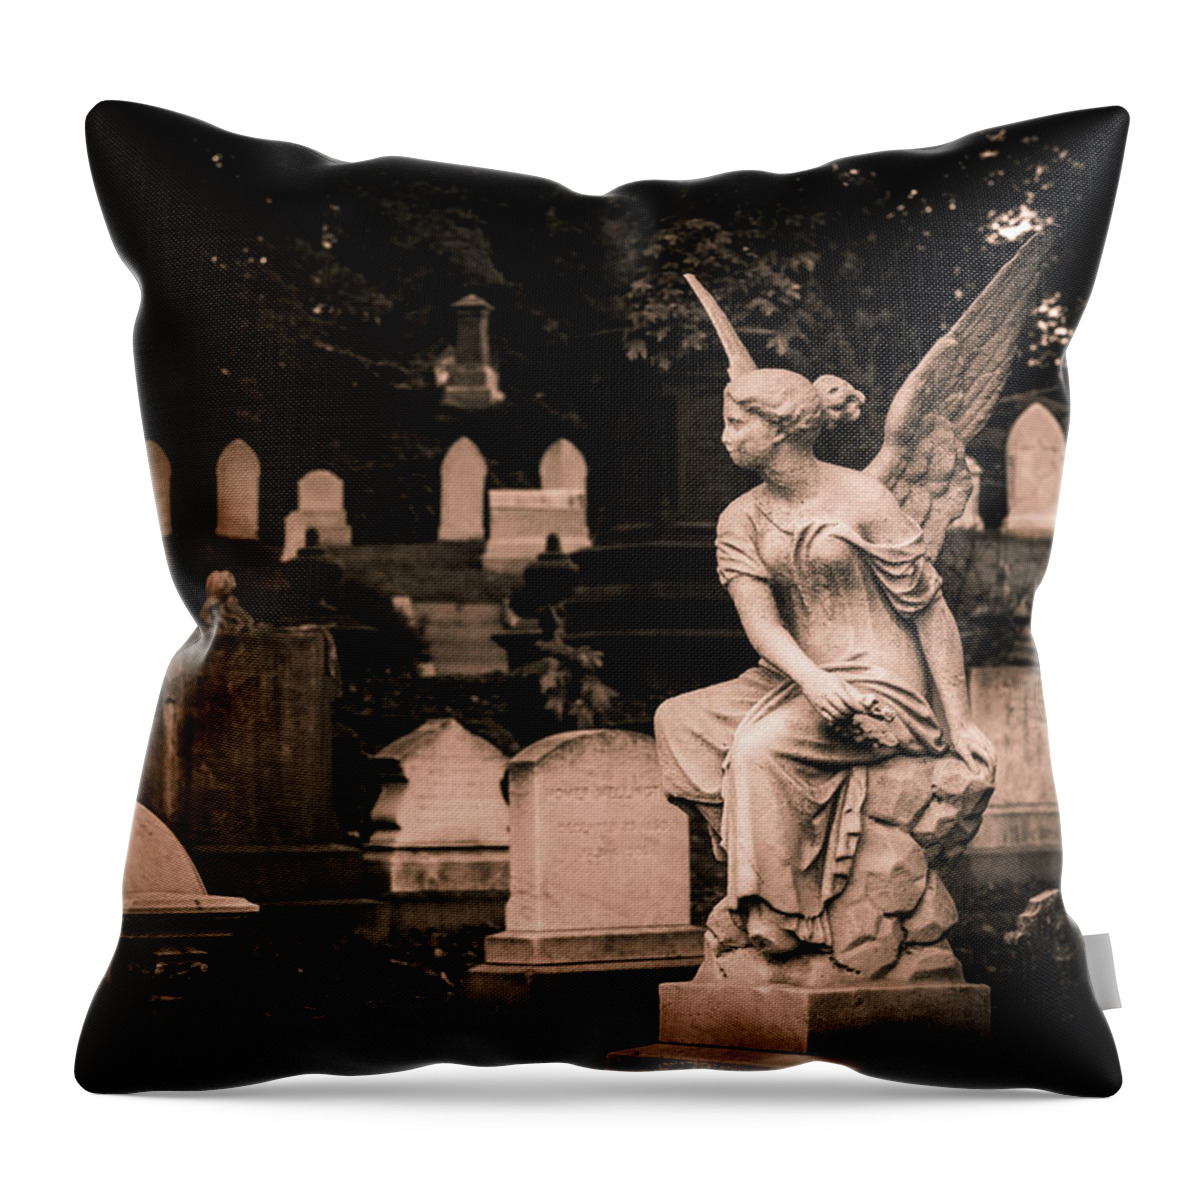 Mount Auburn Cemetery Throw Pillow featuring the photograph Mount Auburn Cemetery Guardian Angel by Michael Saunders